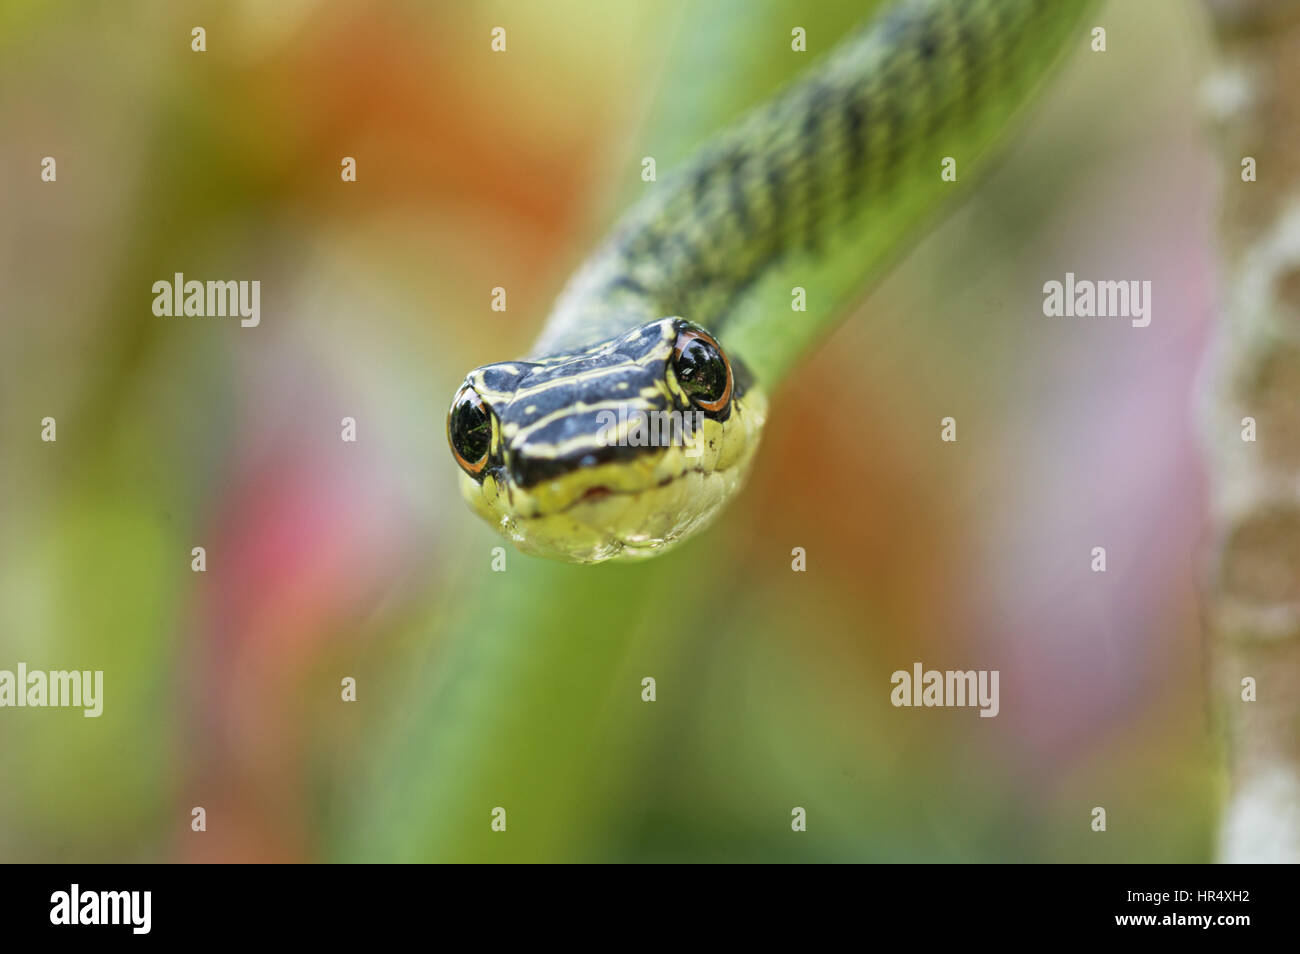 macro image of golden tree snake or Chrysopelea ornata viewed head on with blurry background Stock Photo